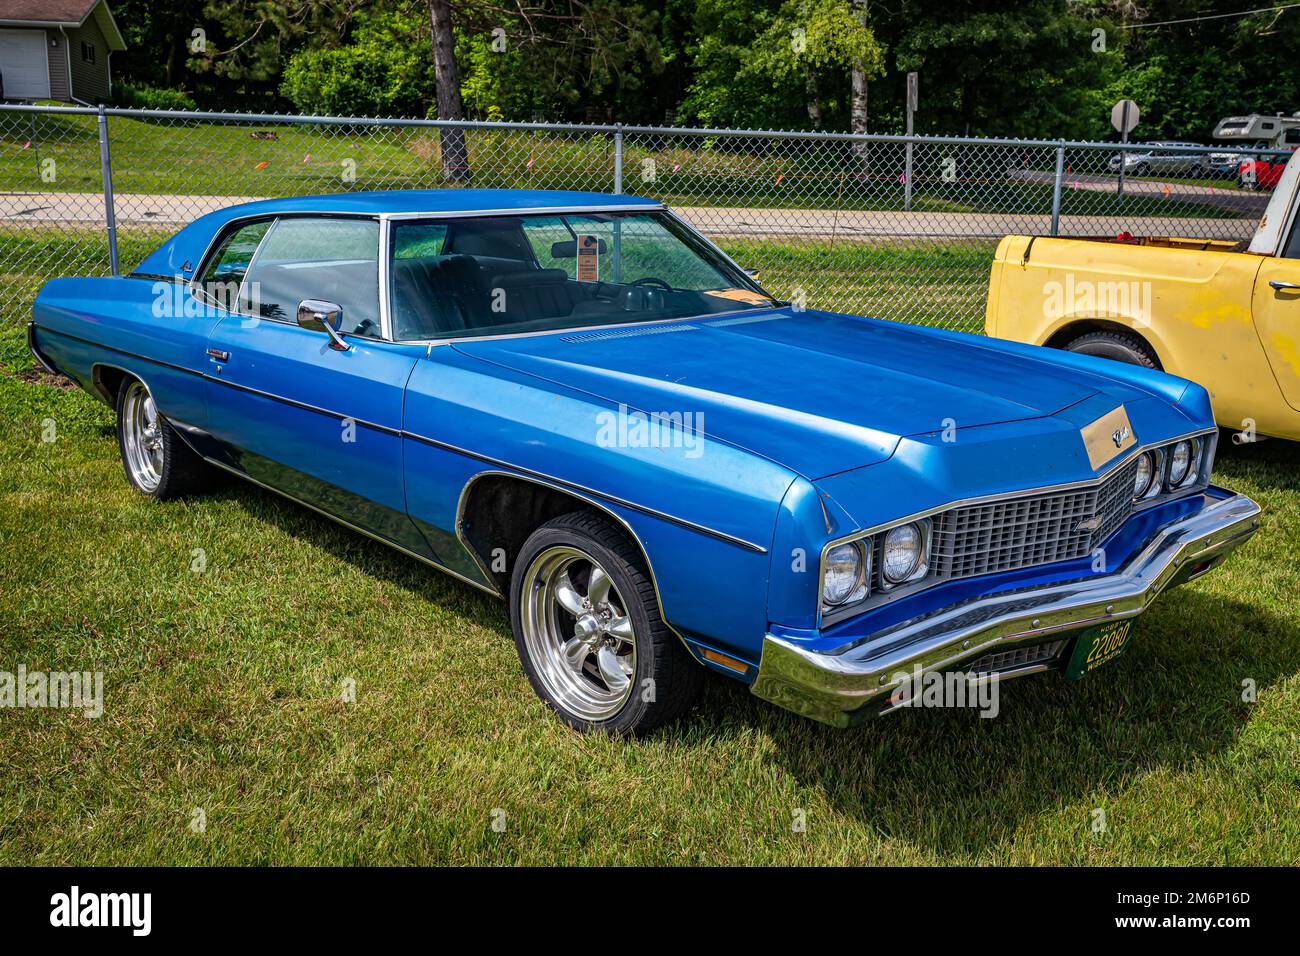 Iola, WI - July 07, 2022: High perspective front corner view of a 1973 Chevrolet Impala 2 Door Hardtop at a local car show. Stock Photo